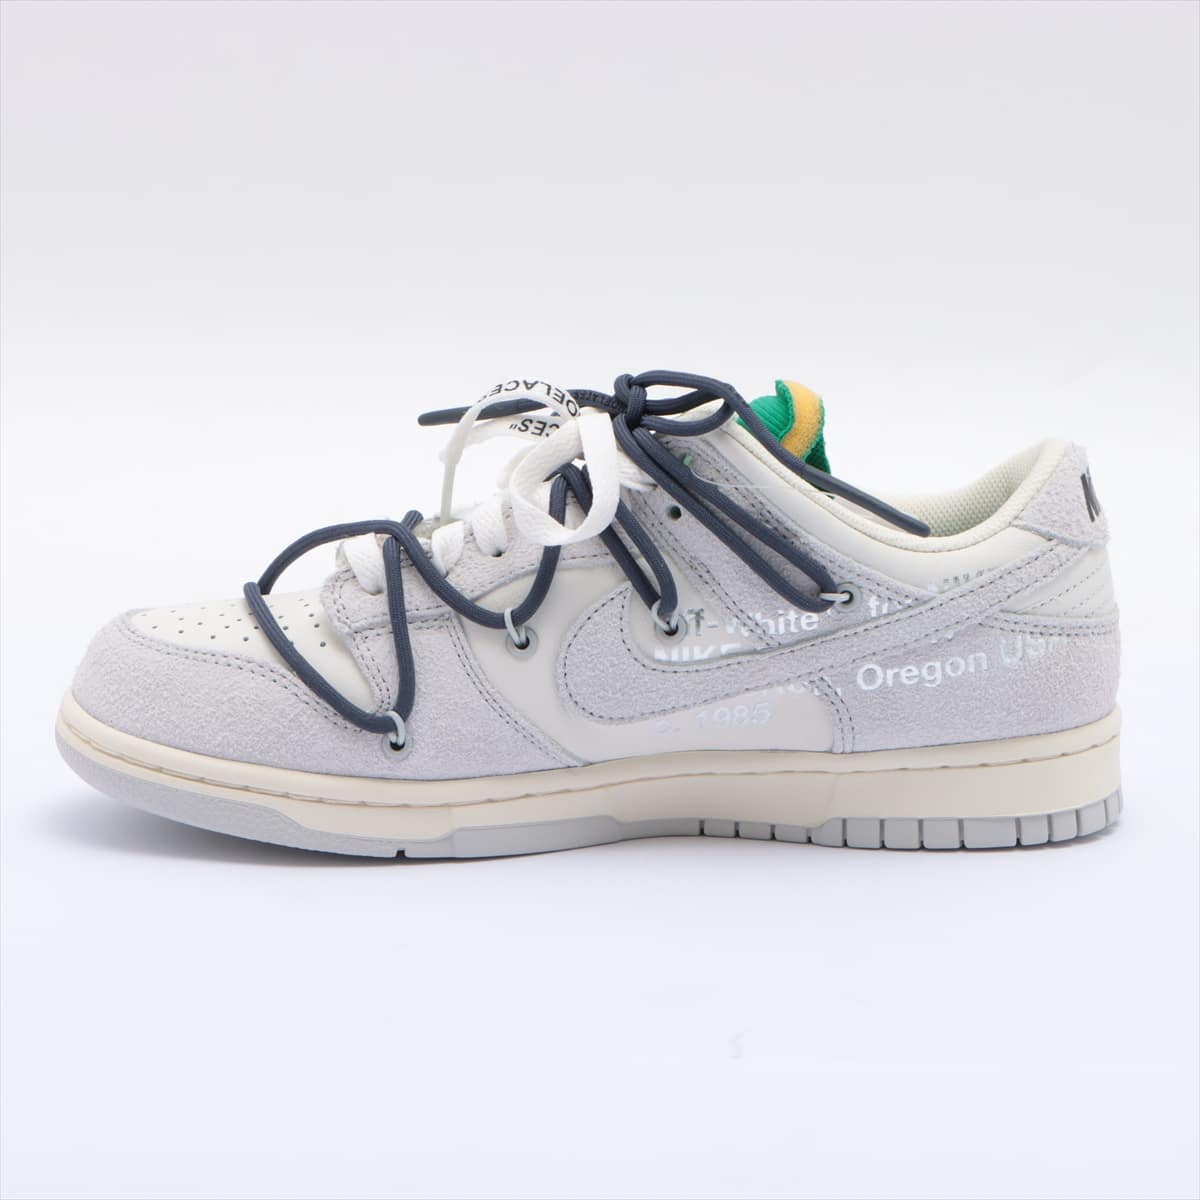 NIKE × OFF-WHITE Leather Sneakers 26.5cm Men's Gray x green Dunk Low The 50 Collection 1 of 50 